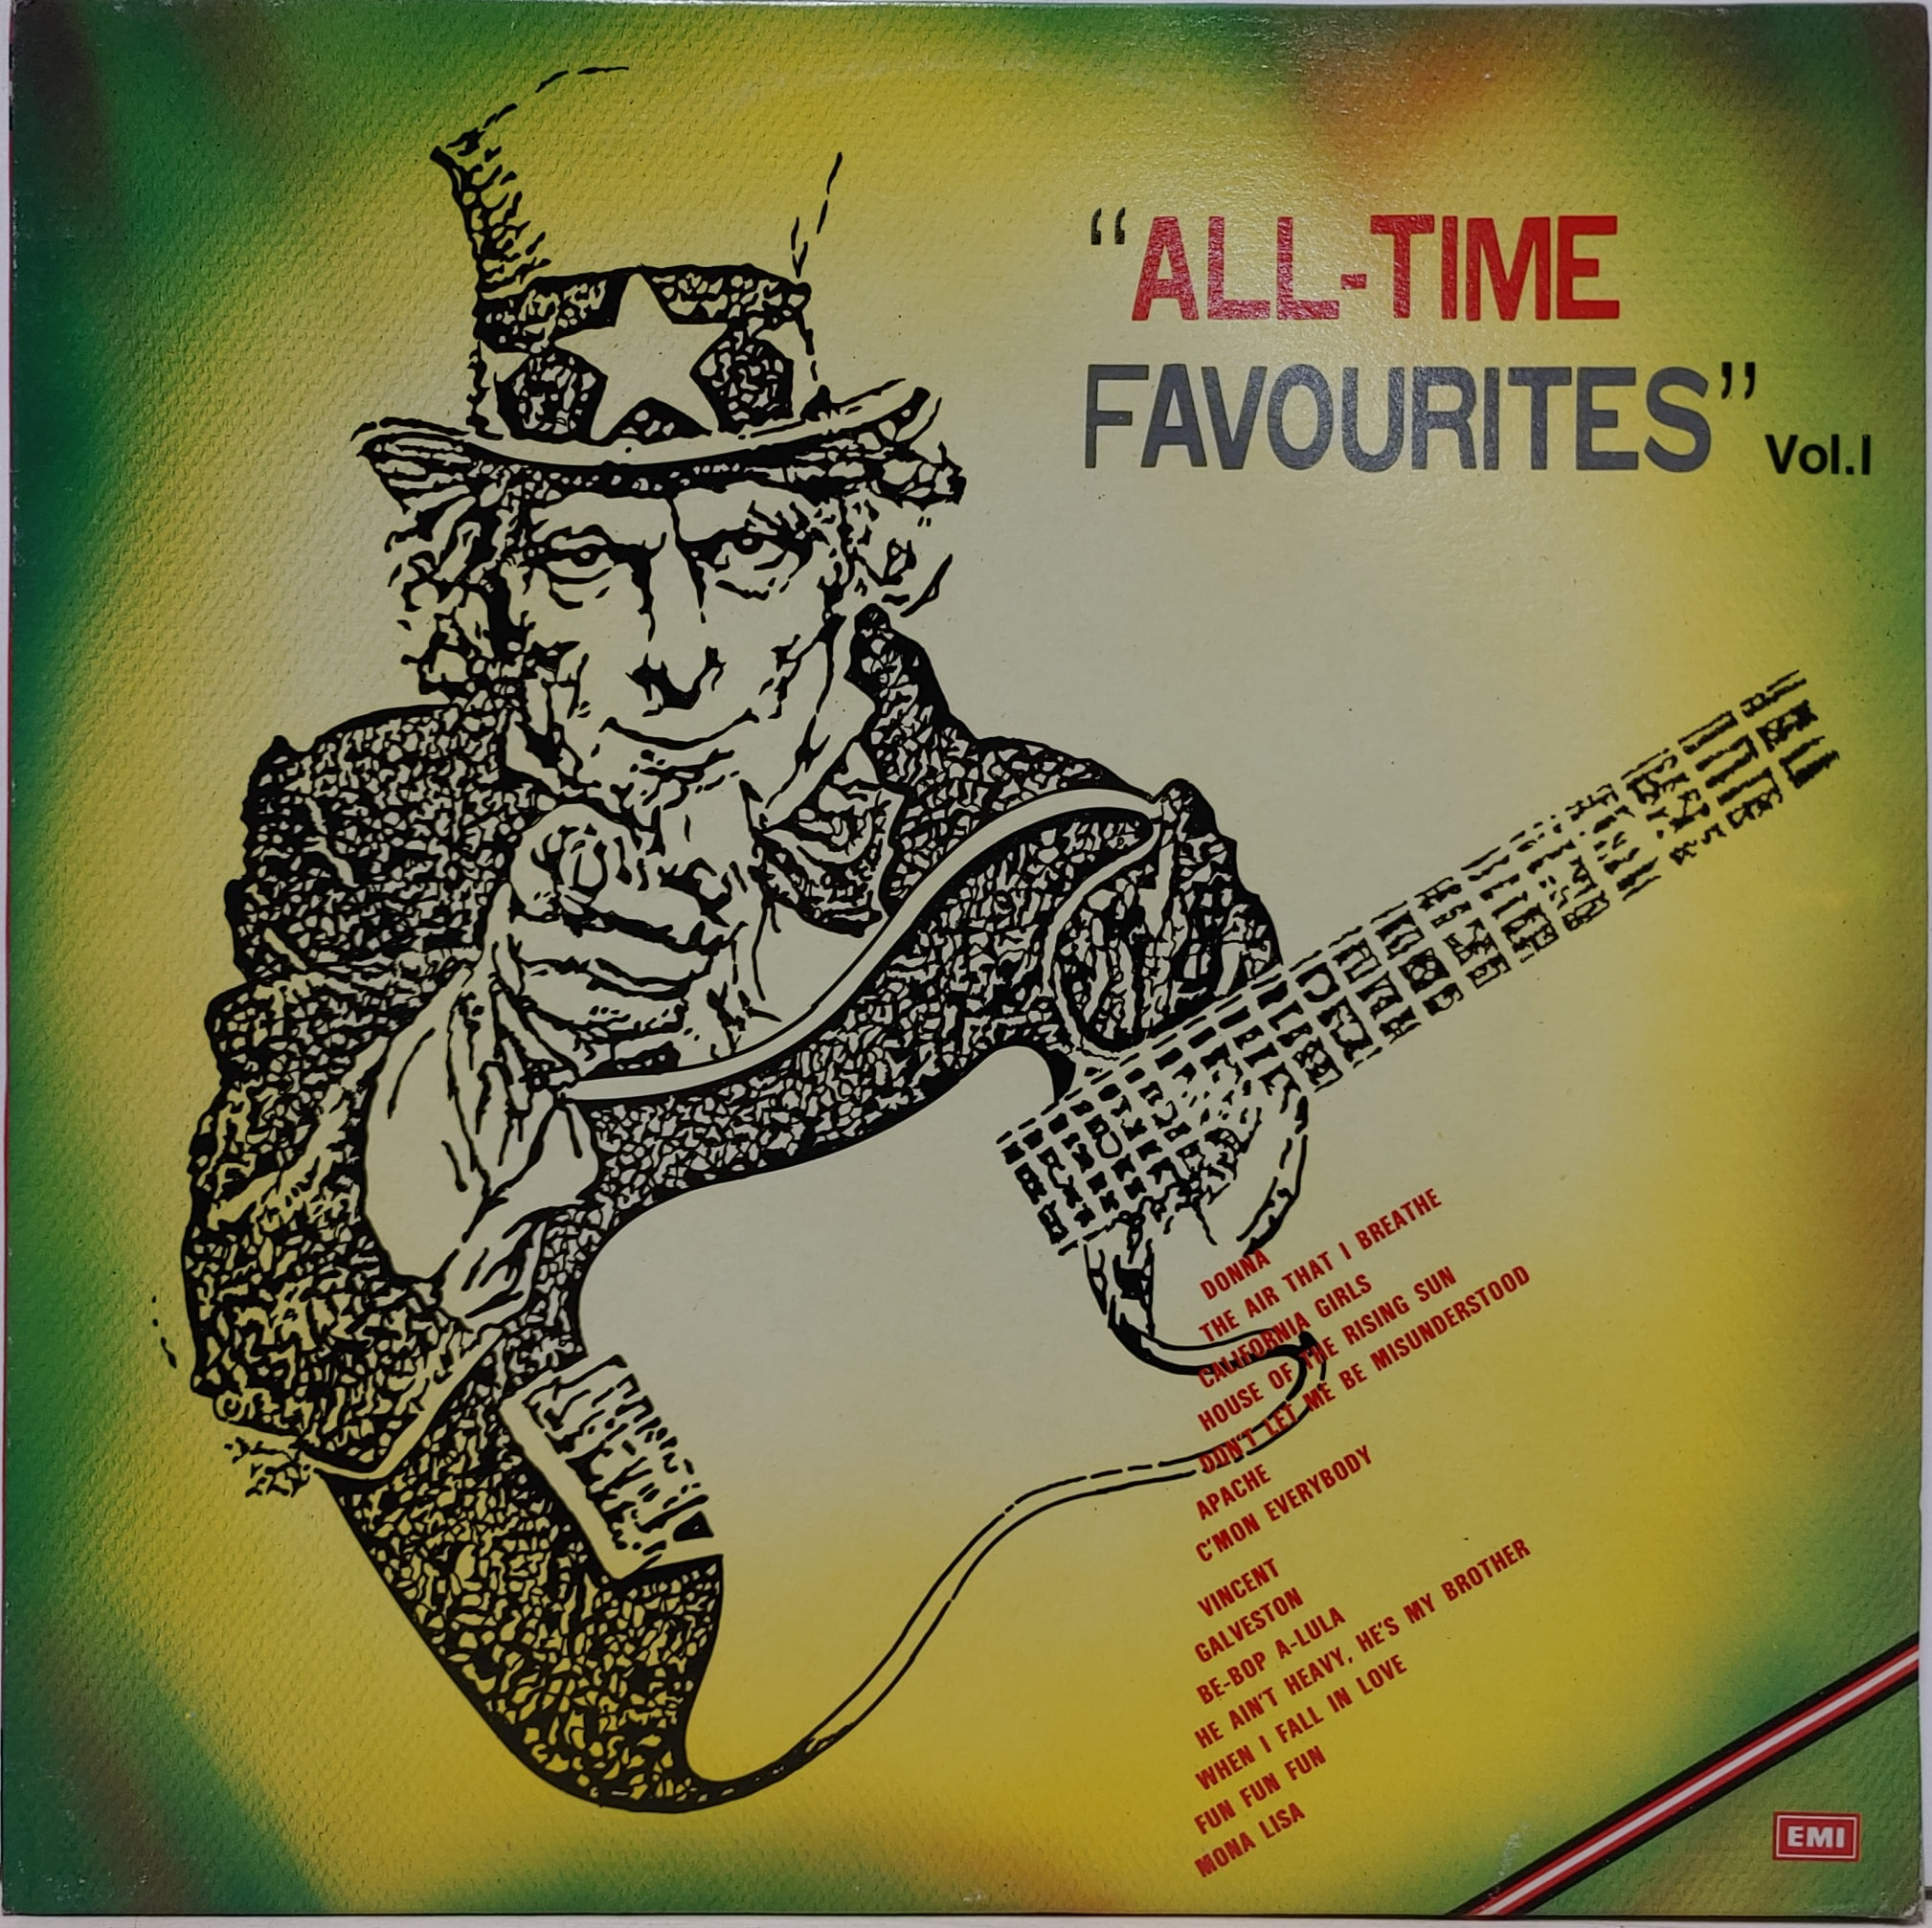 All Time Favourites vol.1